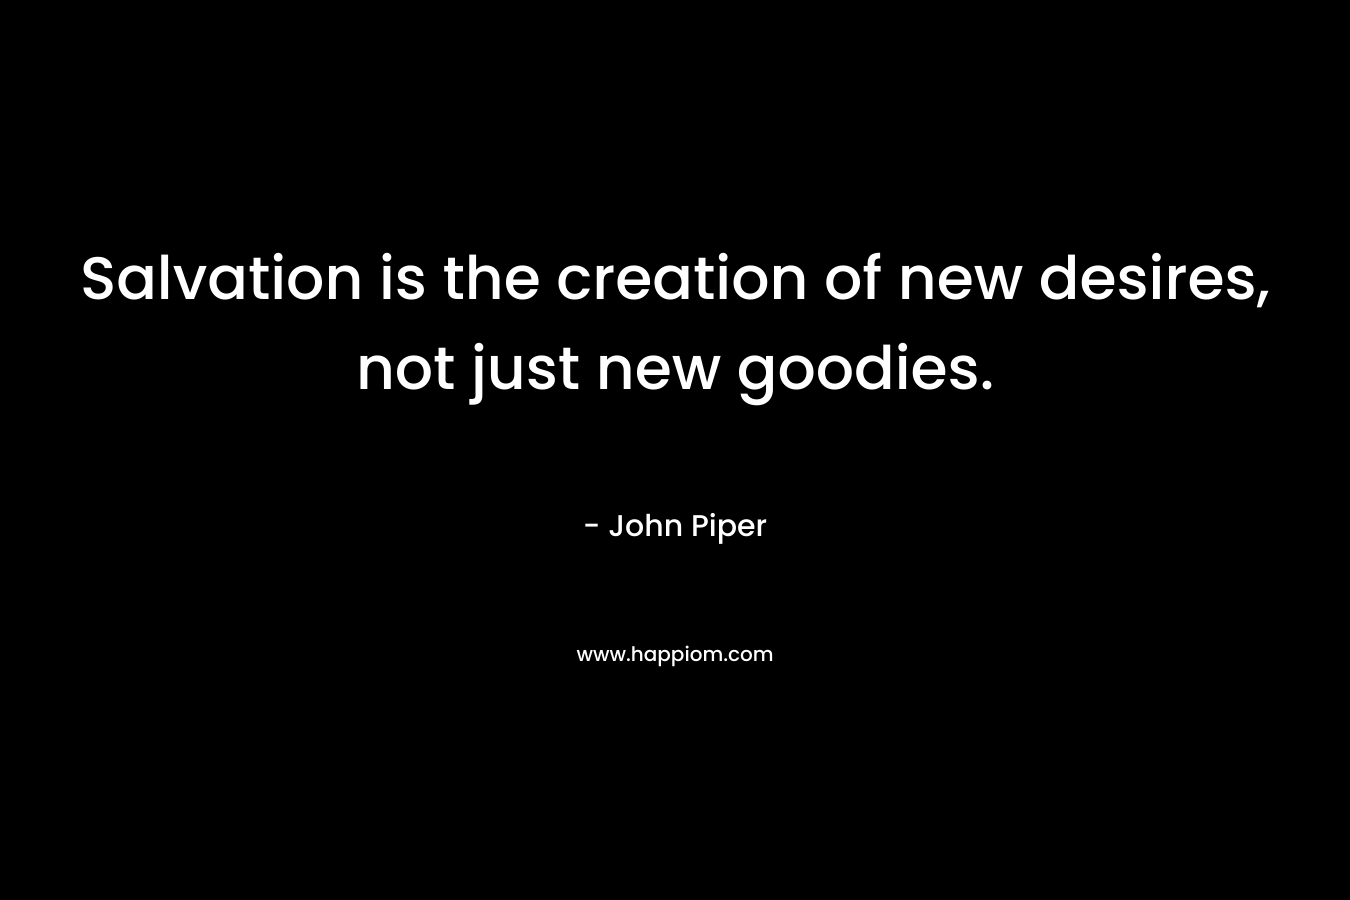 Salvation is the creation of new desires, not just new goodies. – John Piper